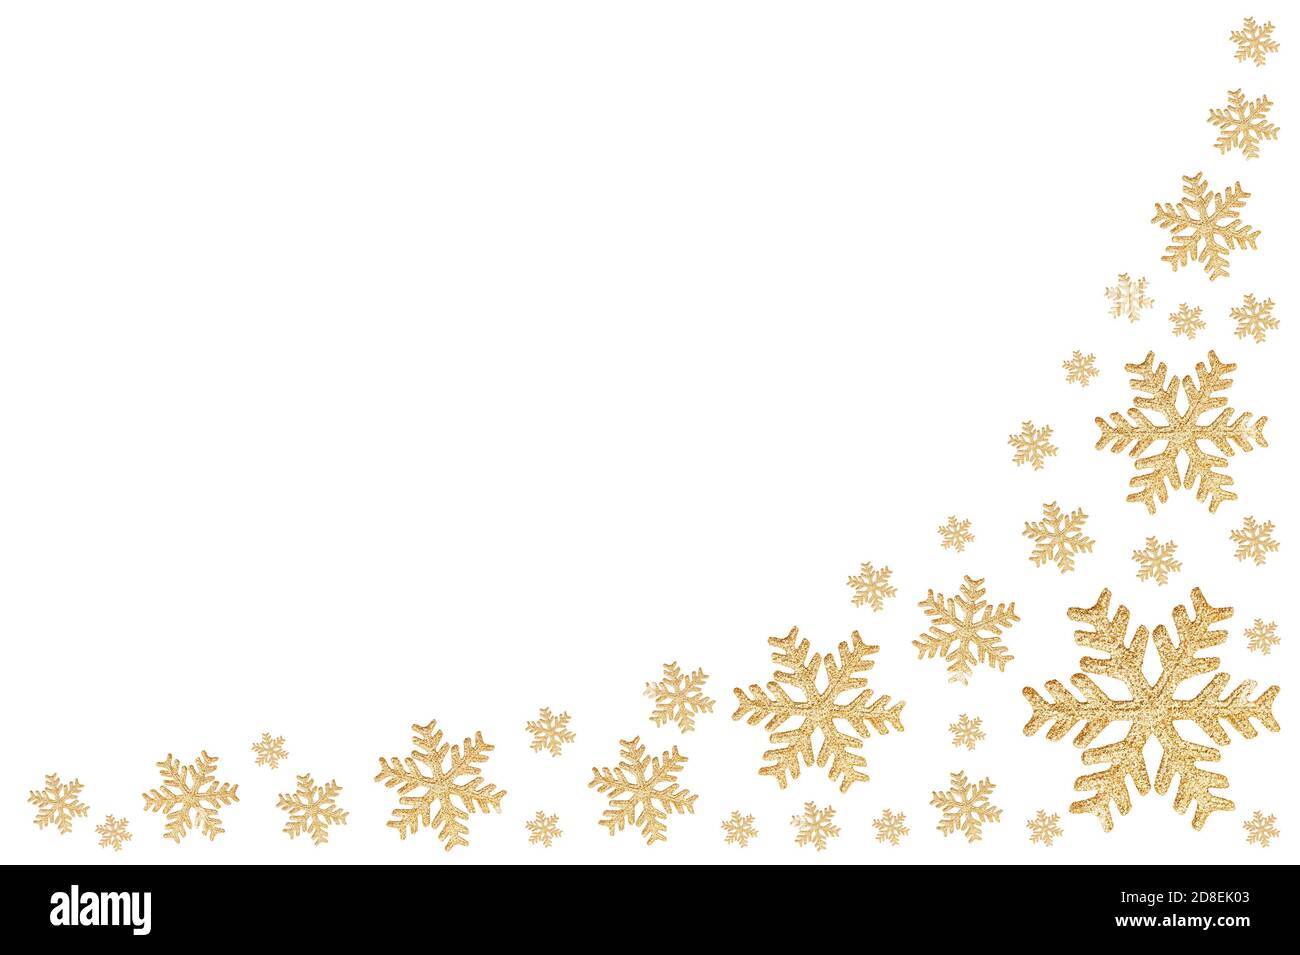 Christmas frame with gold snowflakes Stock Photo